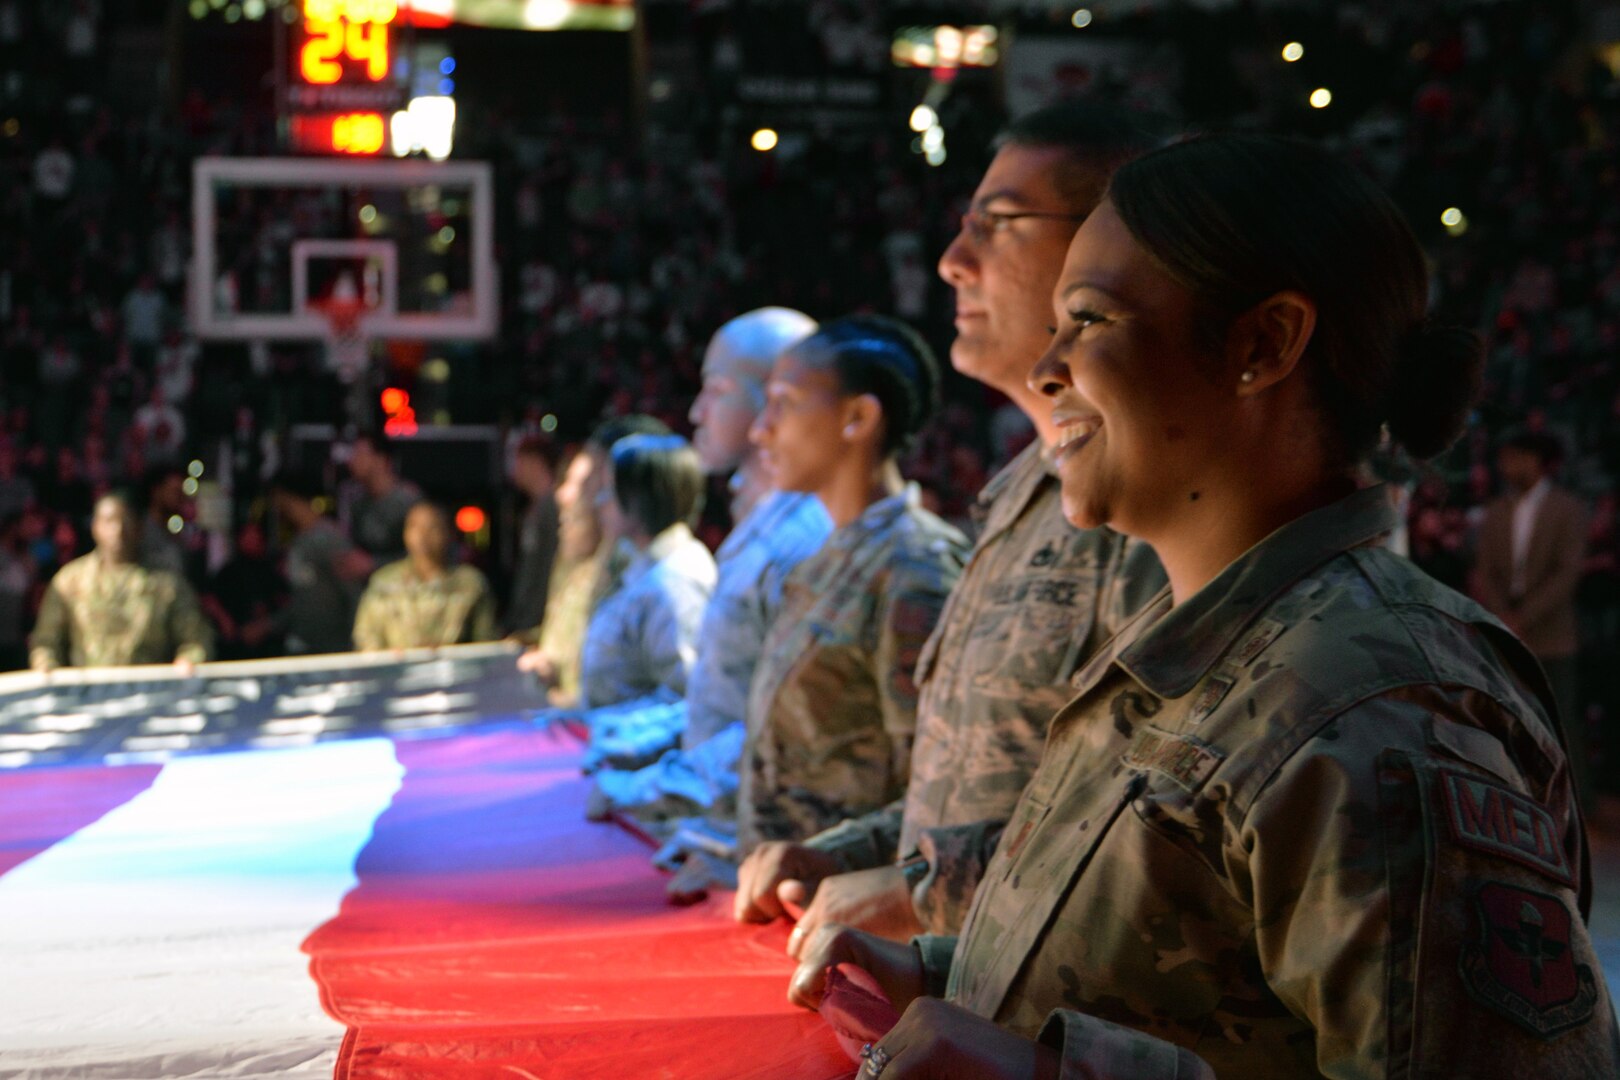 Air Force and Army servicemembers display the American flag while another Airman sings the national anthem at the opening ceremony to a Spurs basketball game March 10, 2020 in San Antonio.